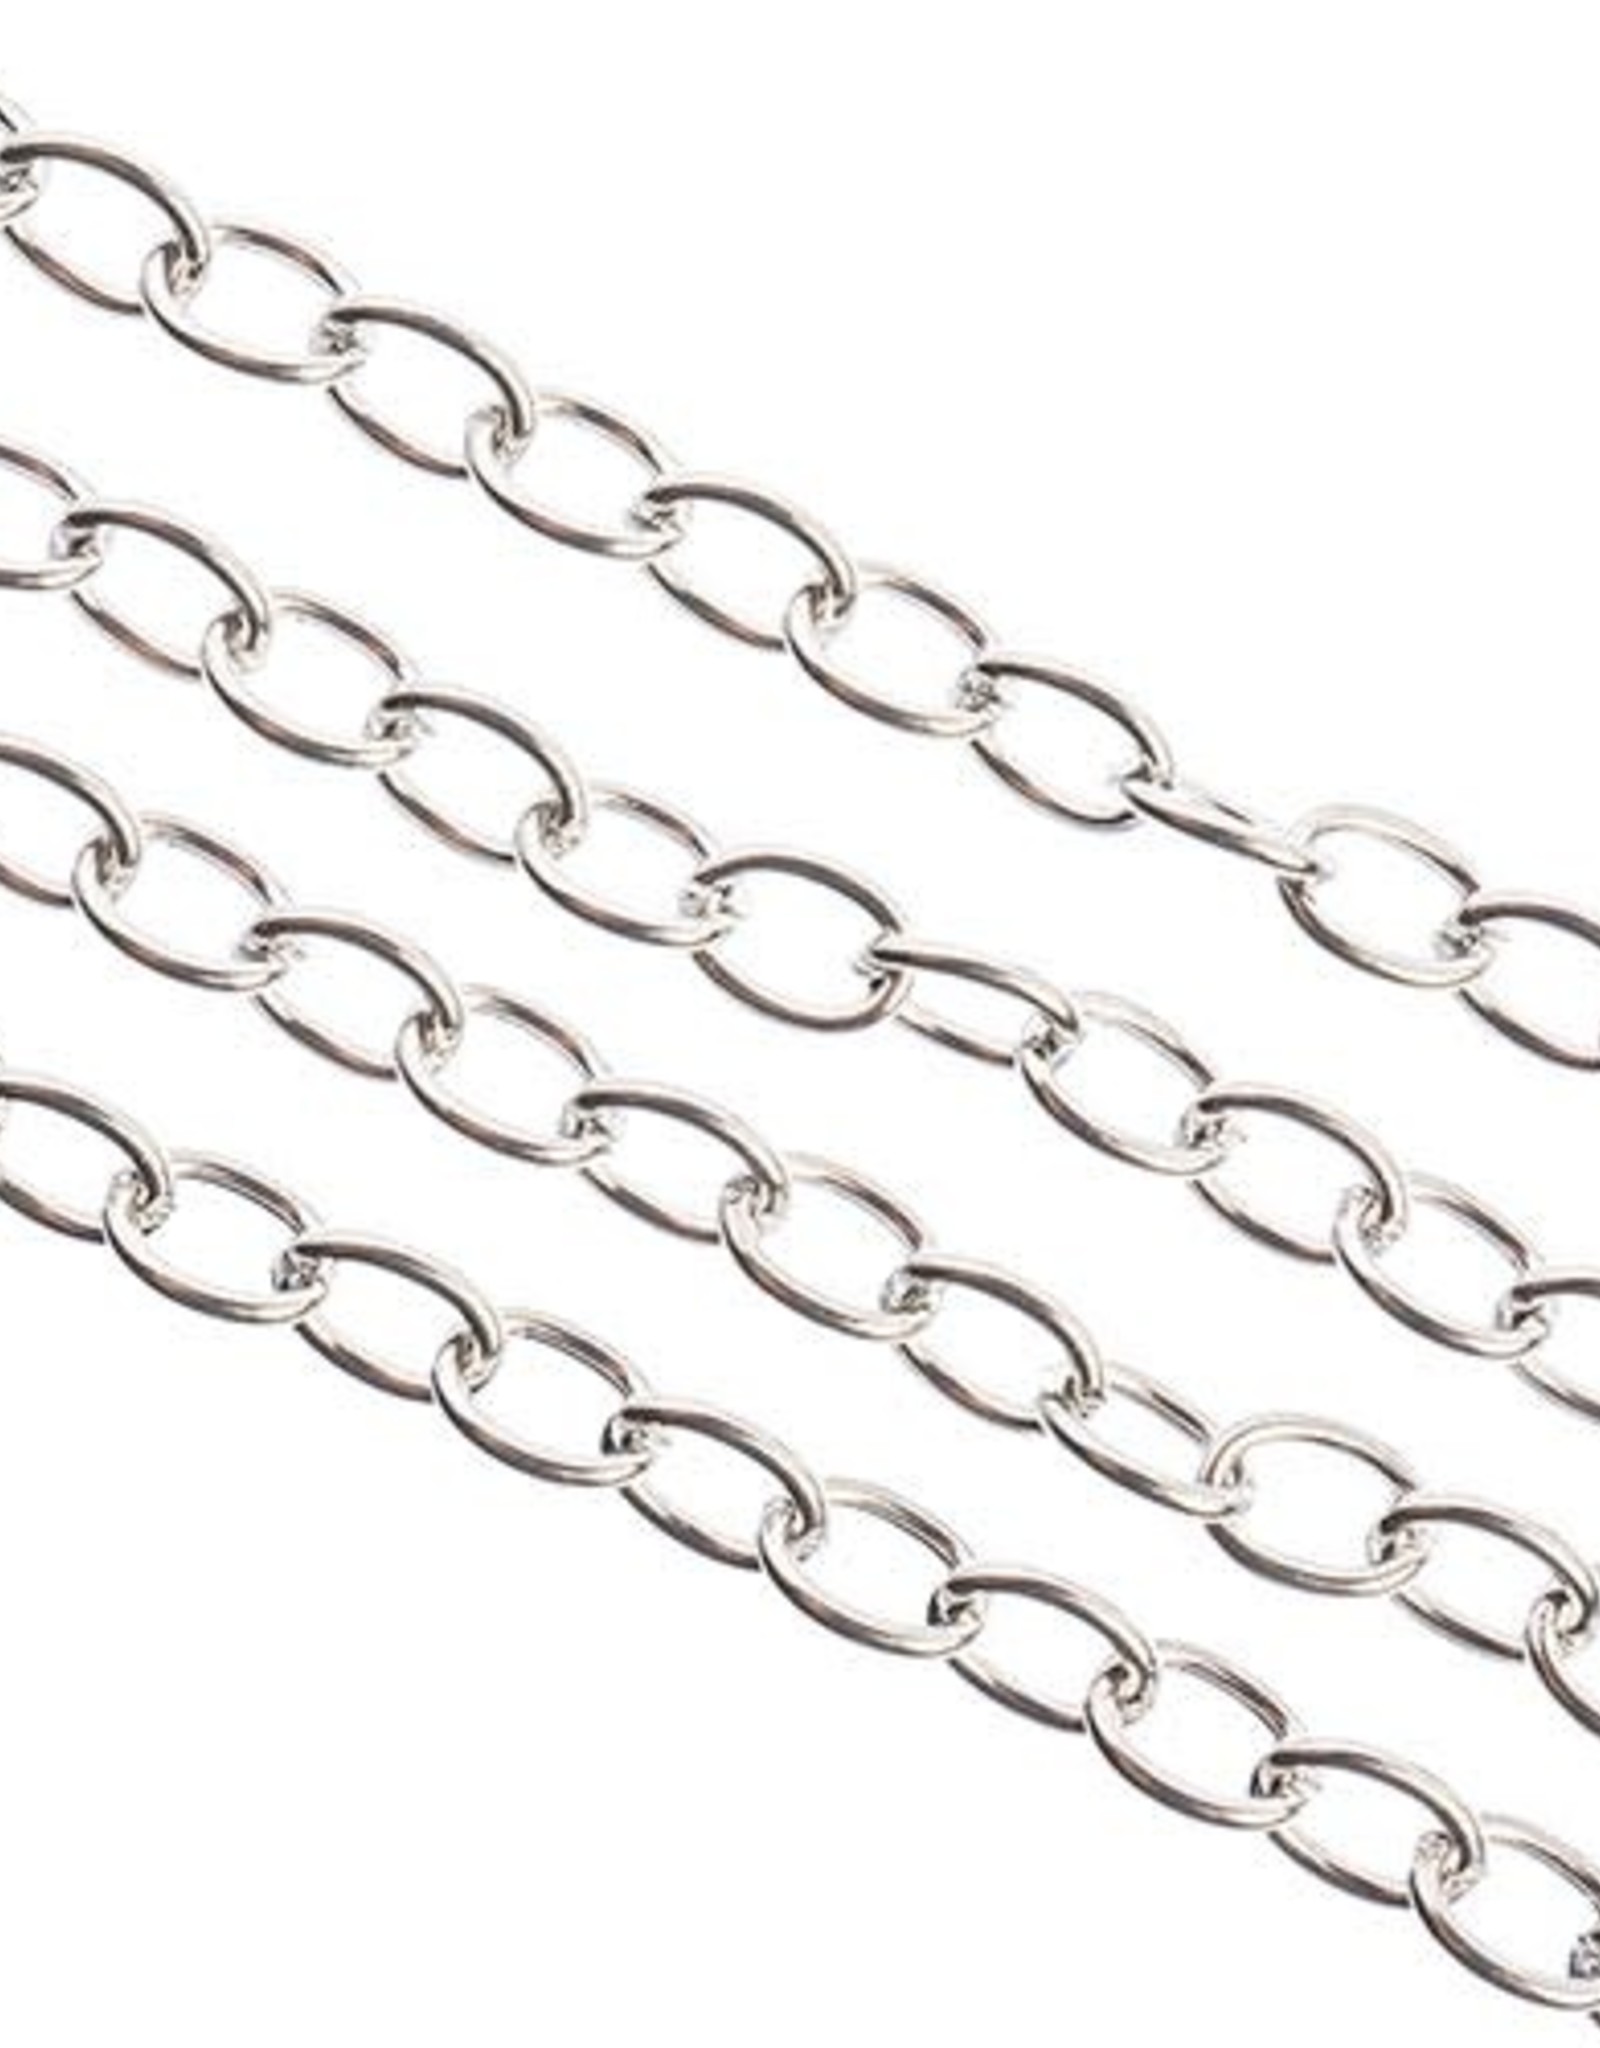 Craft Supplies Stainless Steel Rolo Chain 1m w/ 6.9x5mm Links1400-63